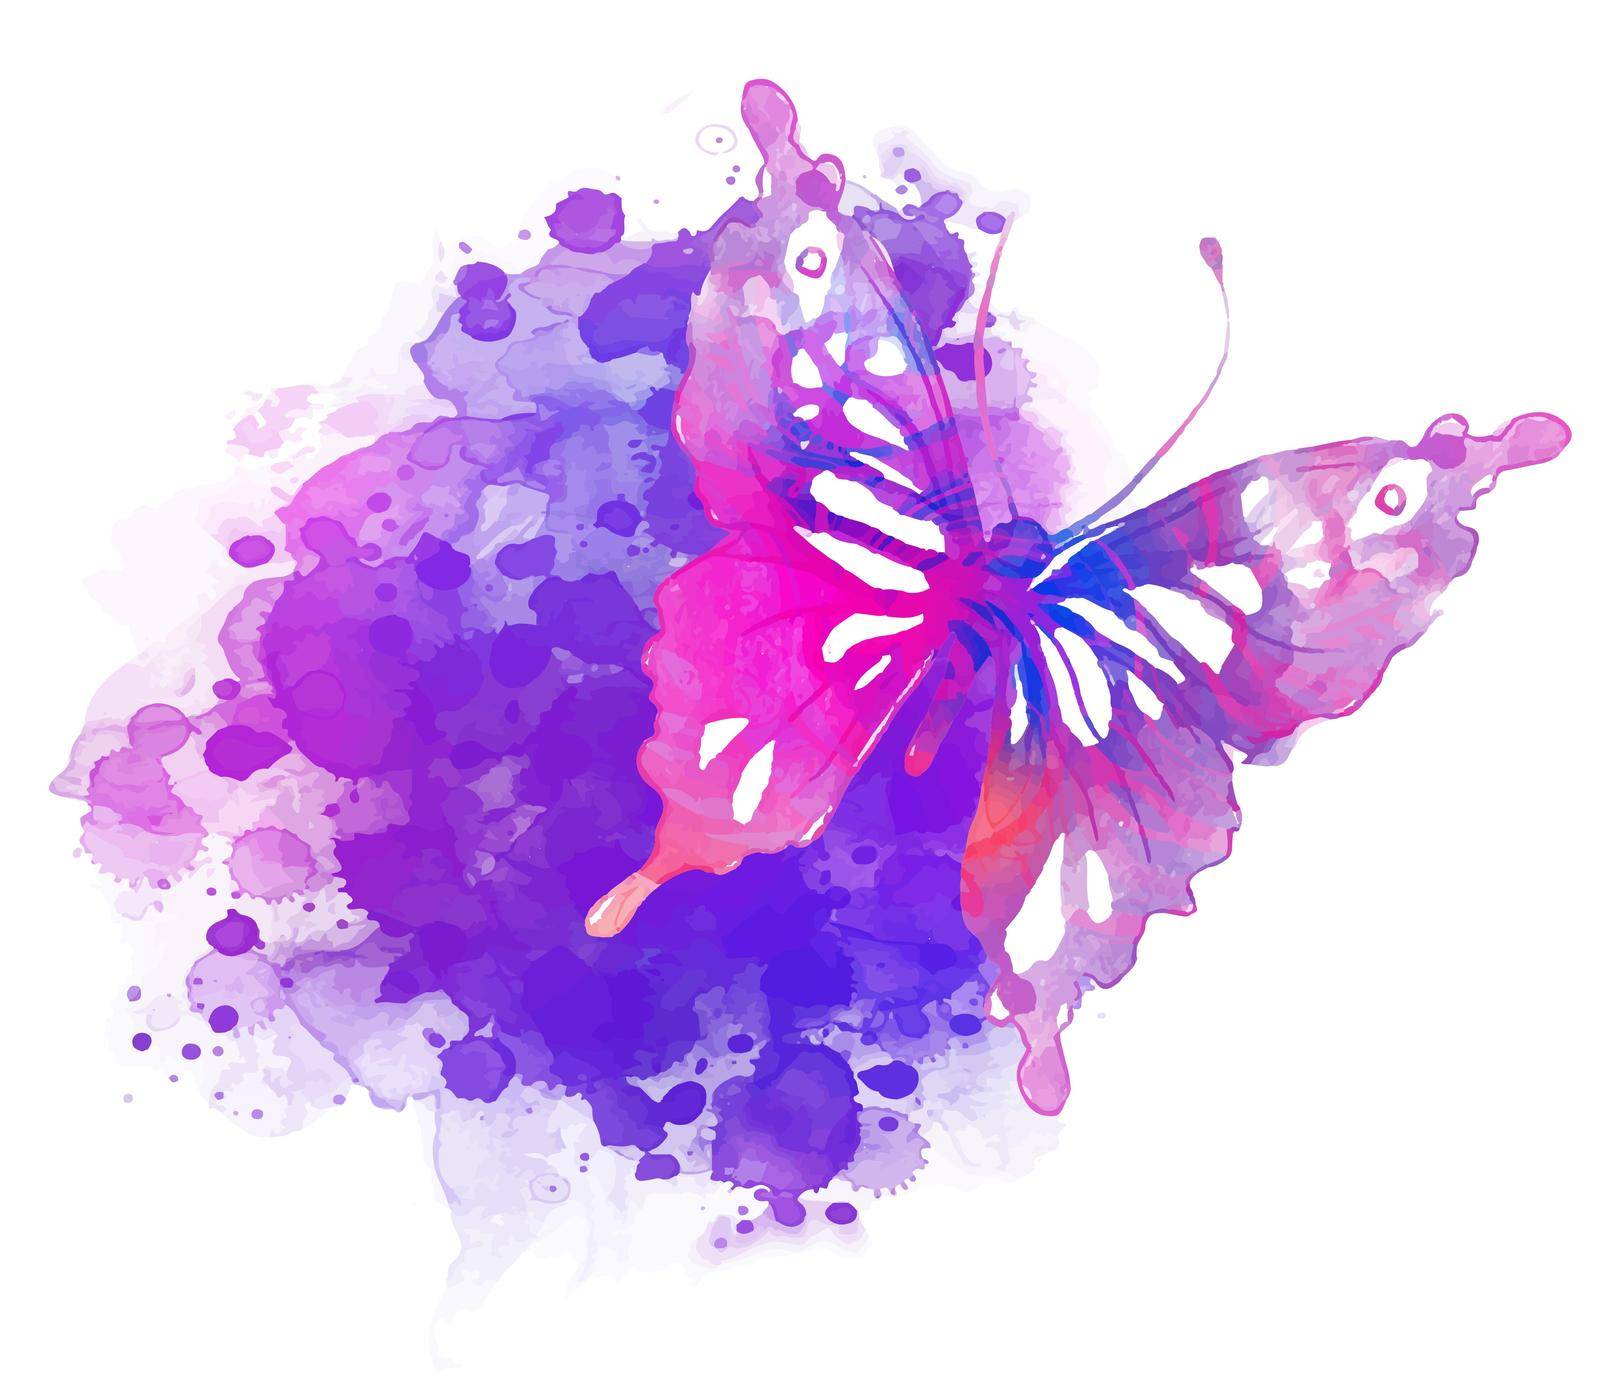 Amazing watercolor background with butterfly by varka